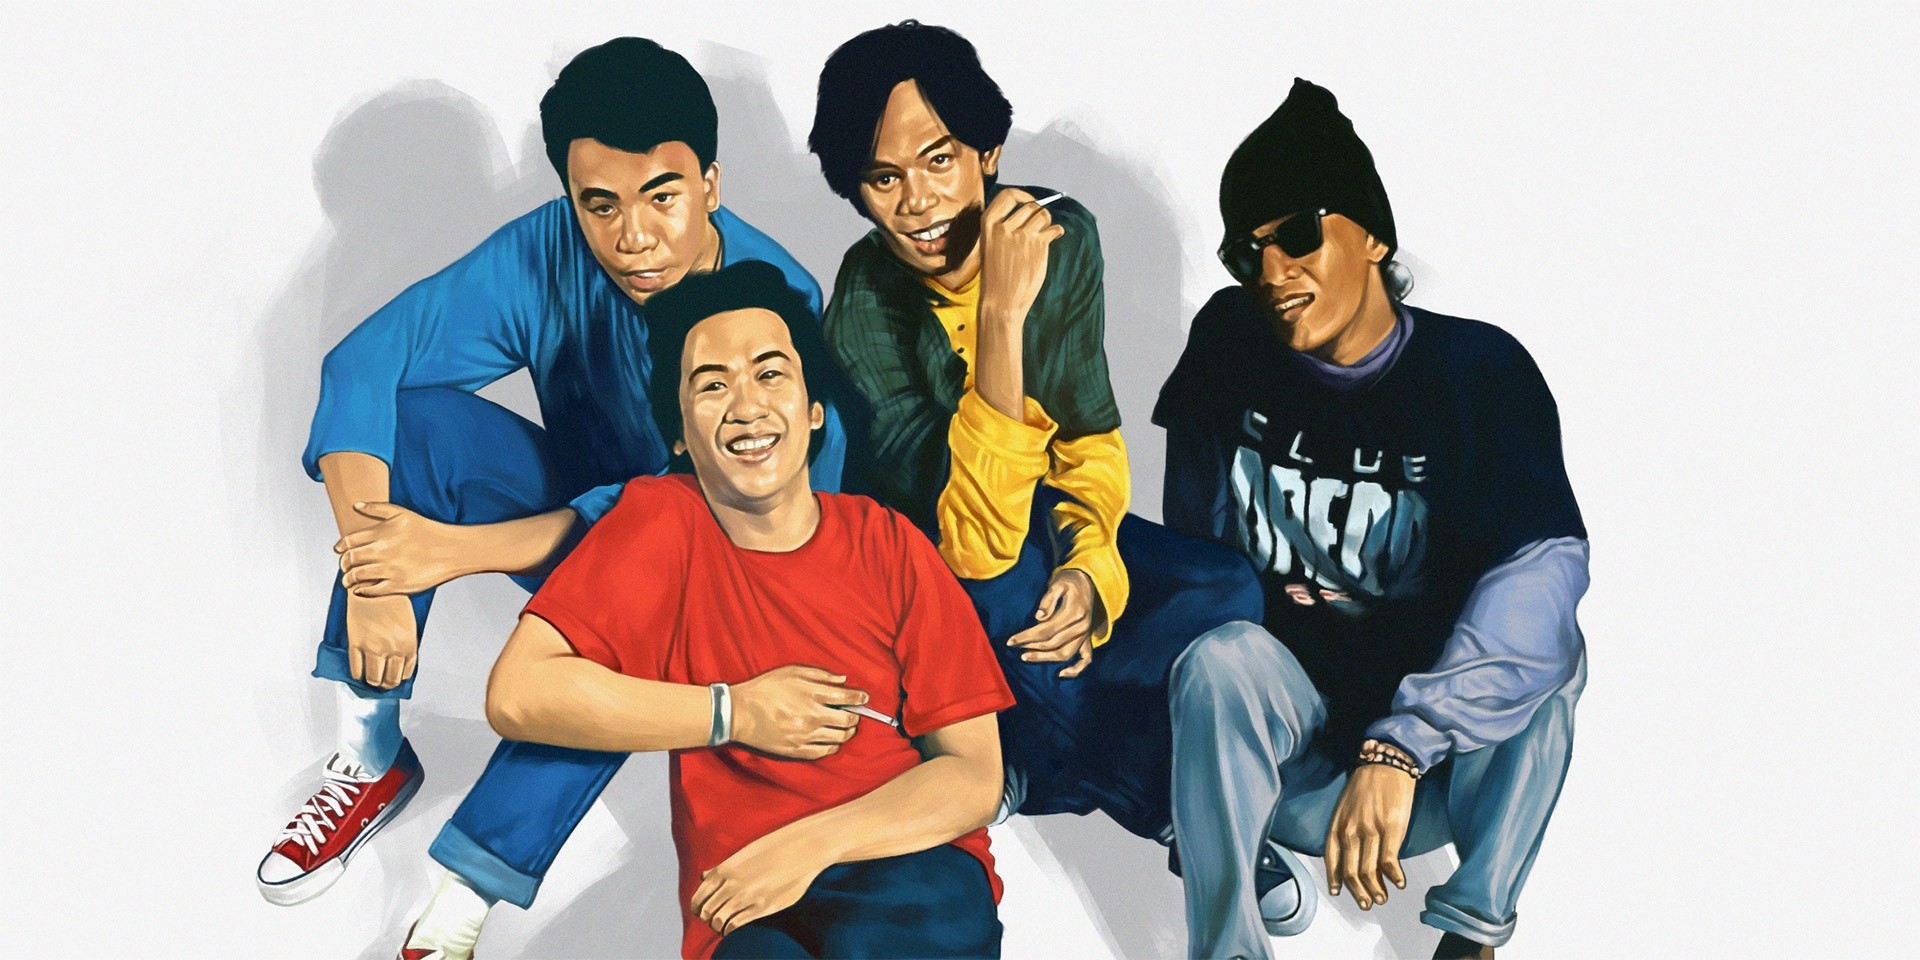 Eraserheads to celebrate 25 years of Ultraelectromagneticpop! with remastered album release